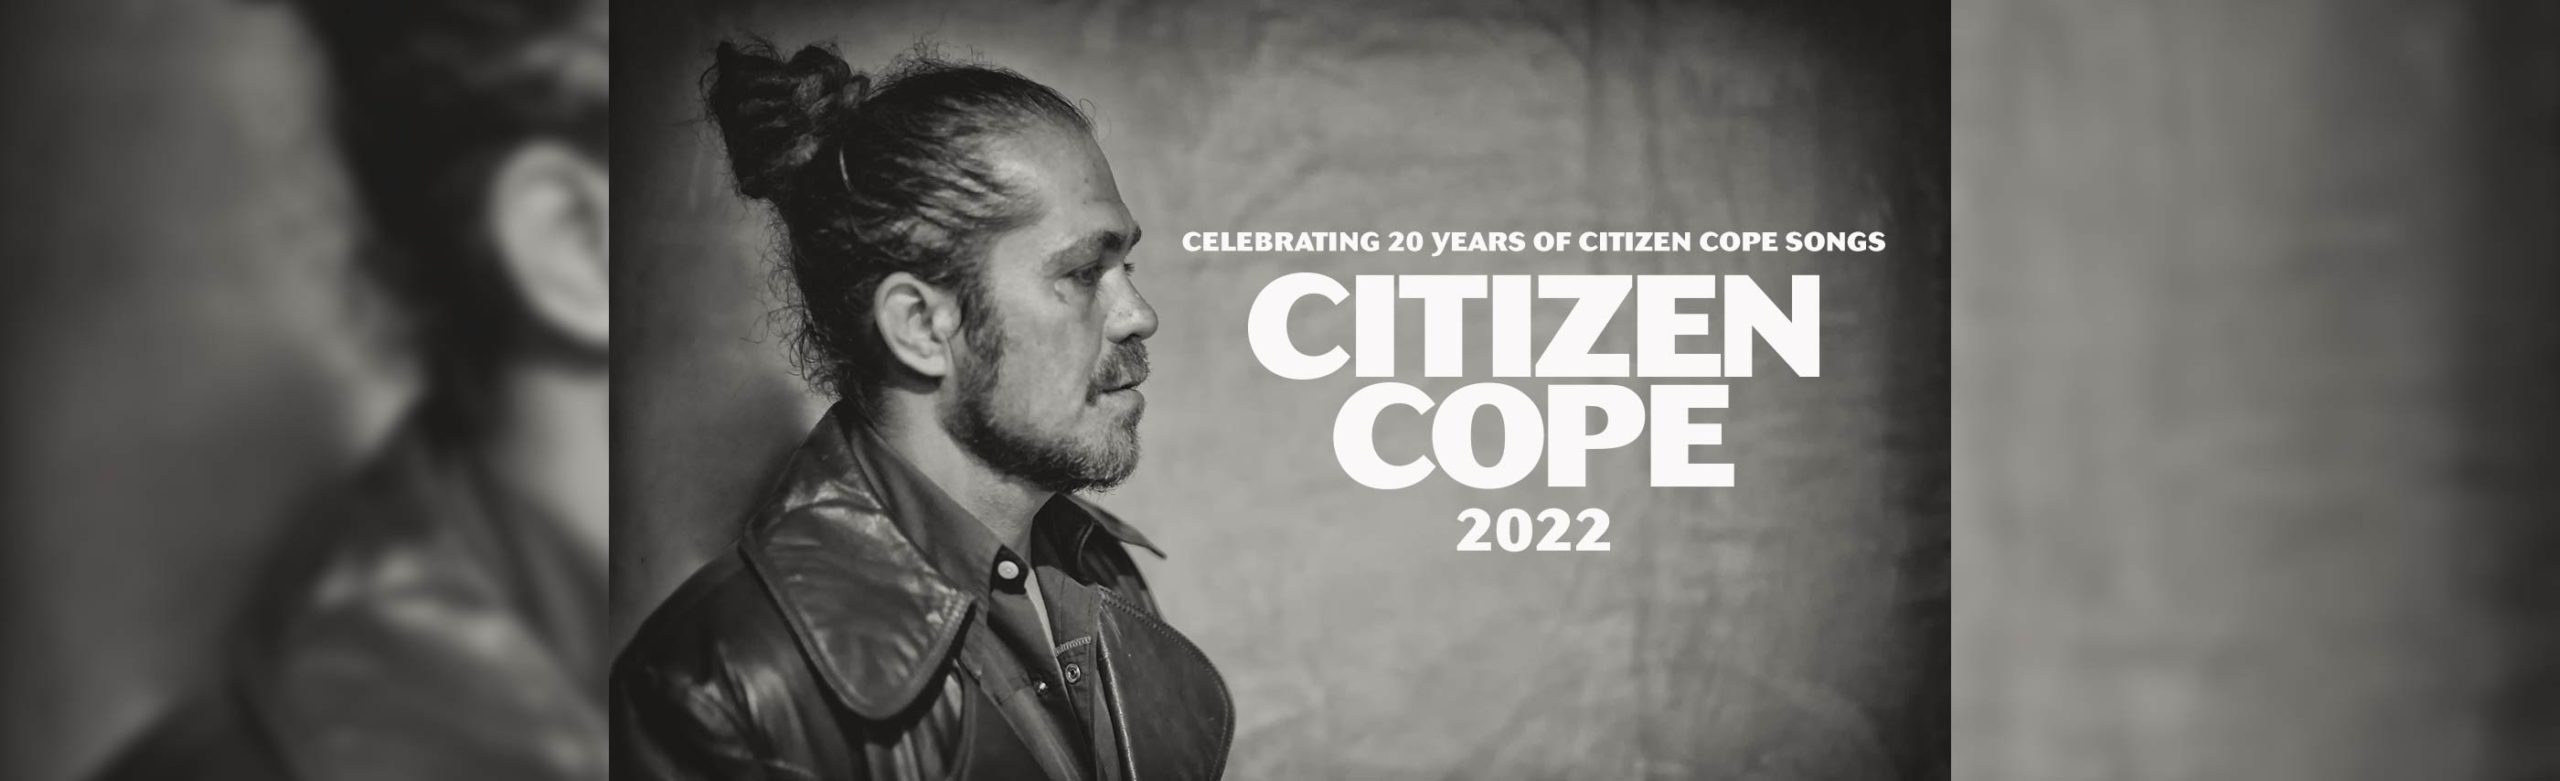 Event Info: Citizen Cope at The ELM 2022 Image